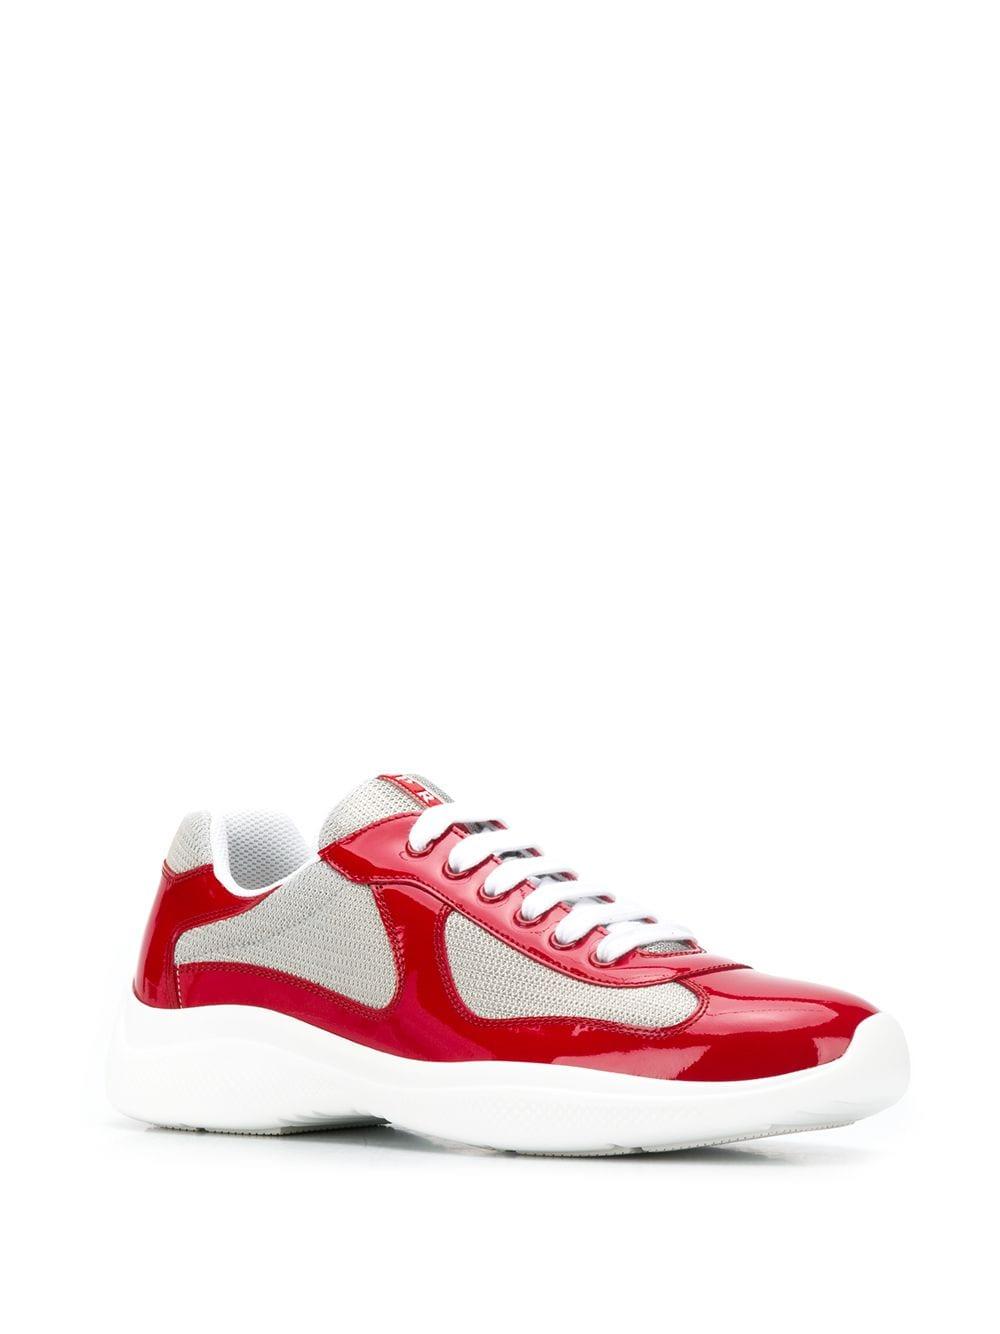 Prada Men's Shoes Leather Trainers Sneakers in Red for Men - Save 67% - Lyst